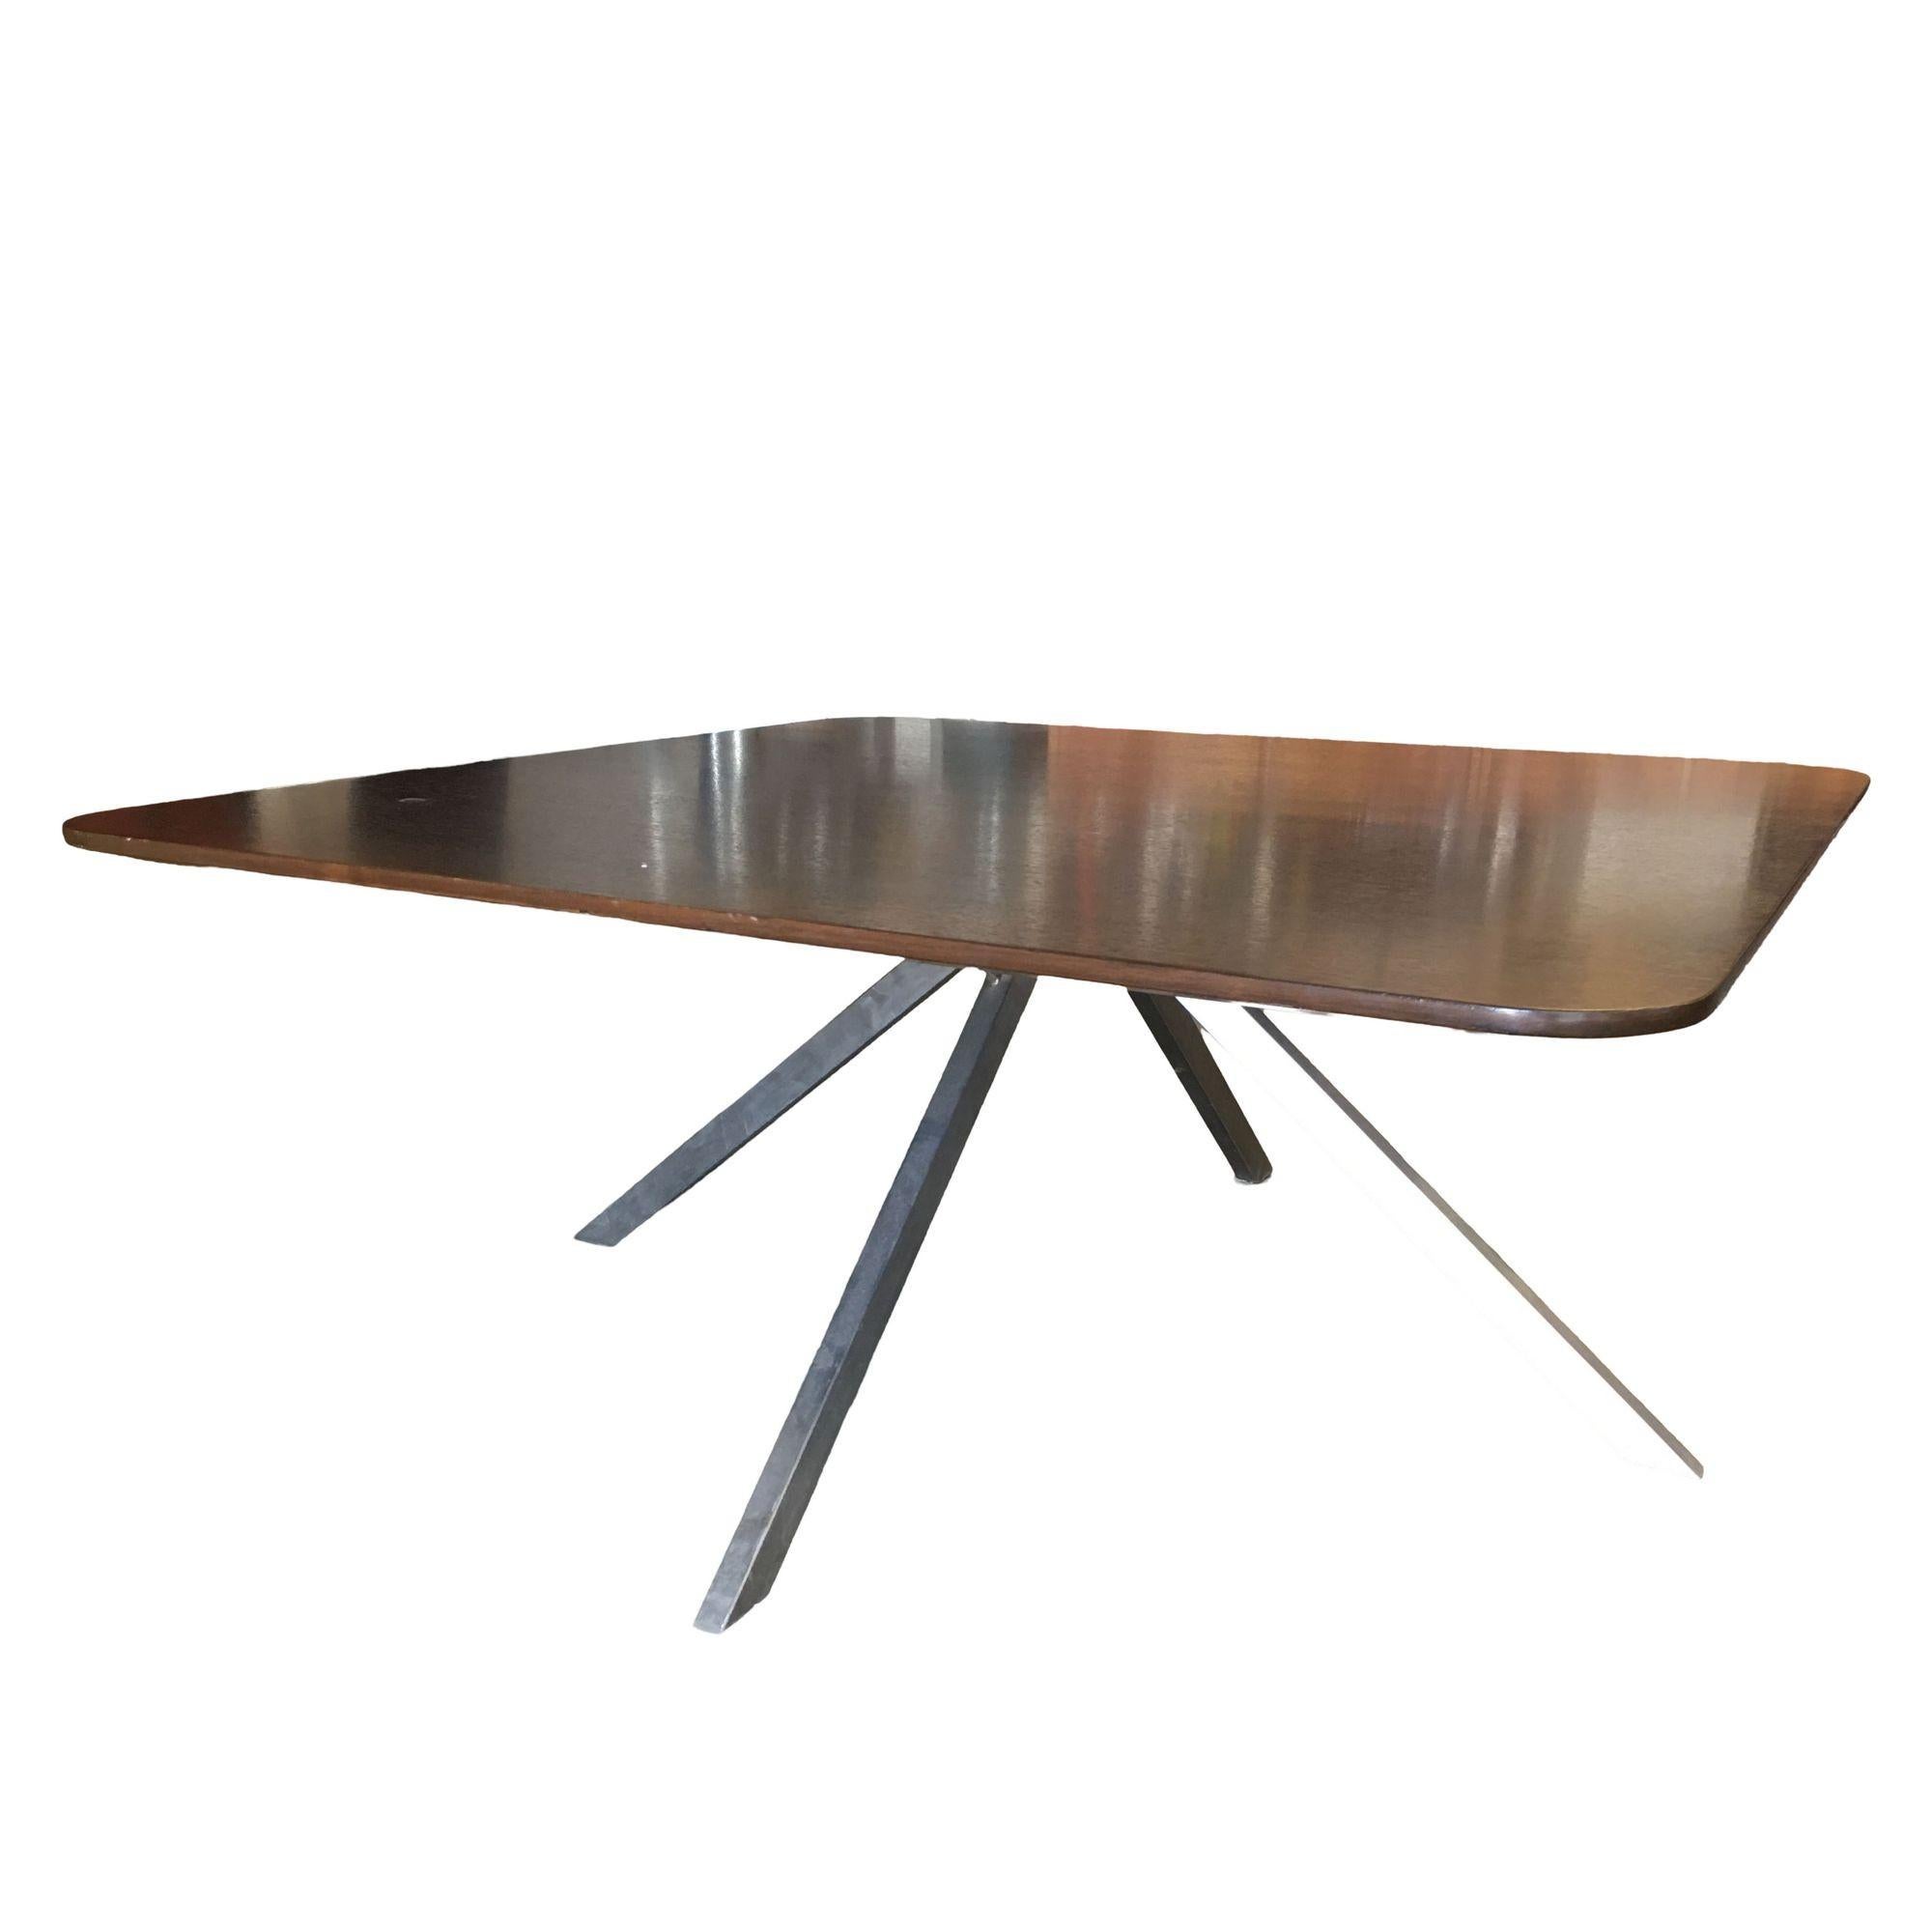 Large tripod leg coffee table featuring a dark stained oak top and a silver powder-coated 